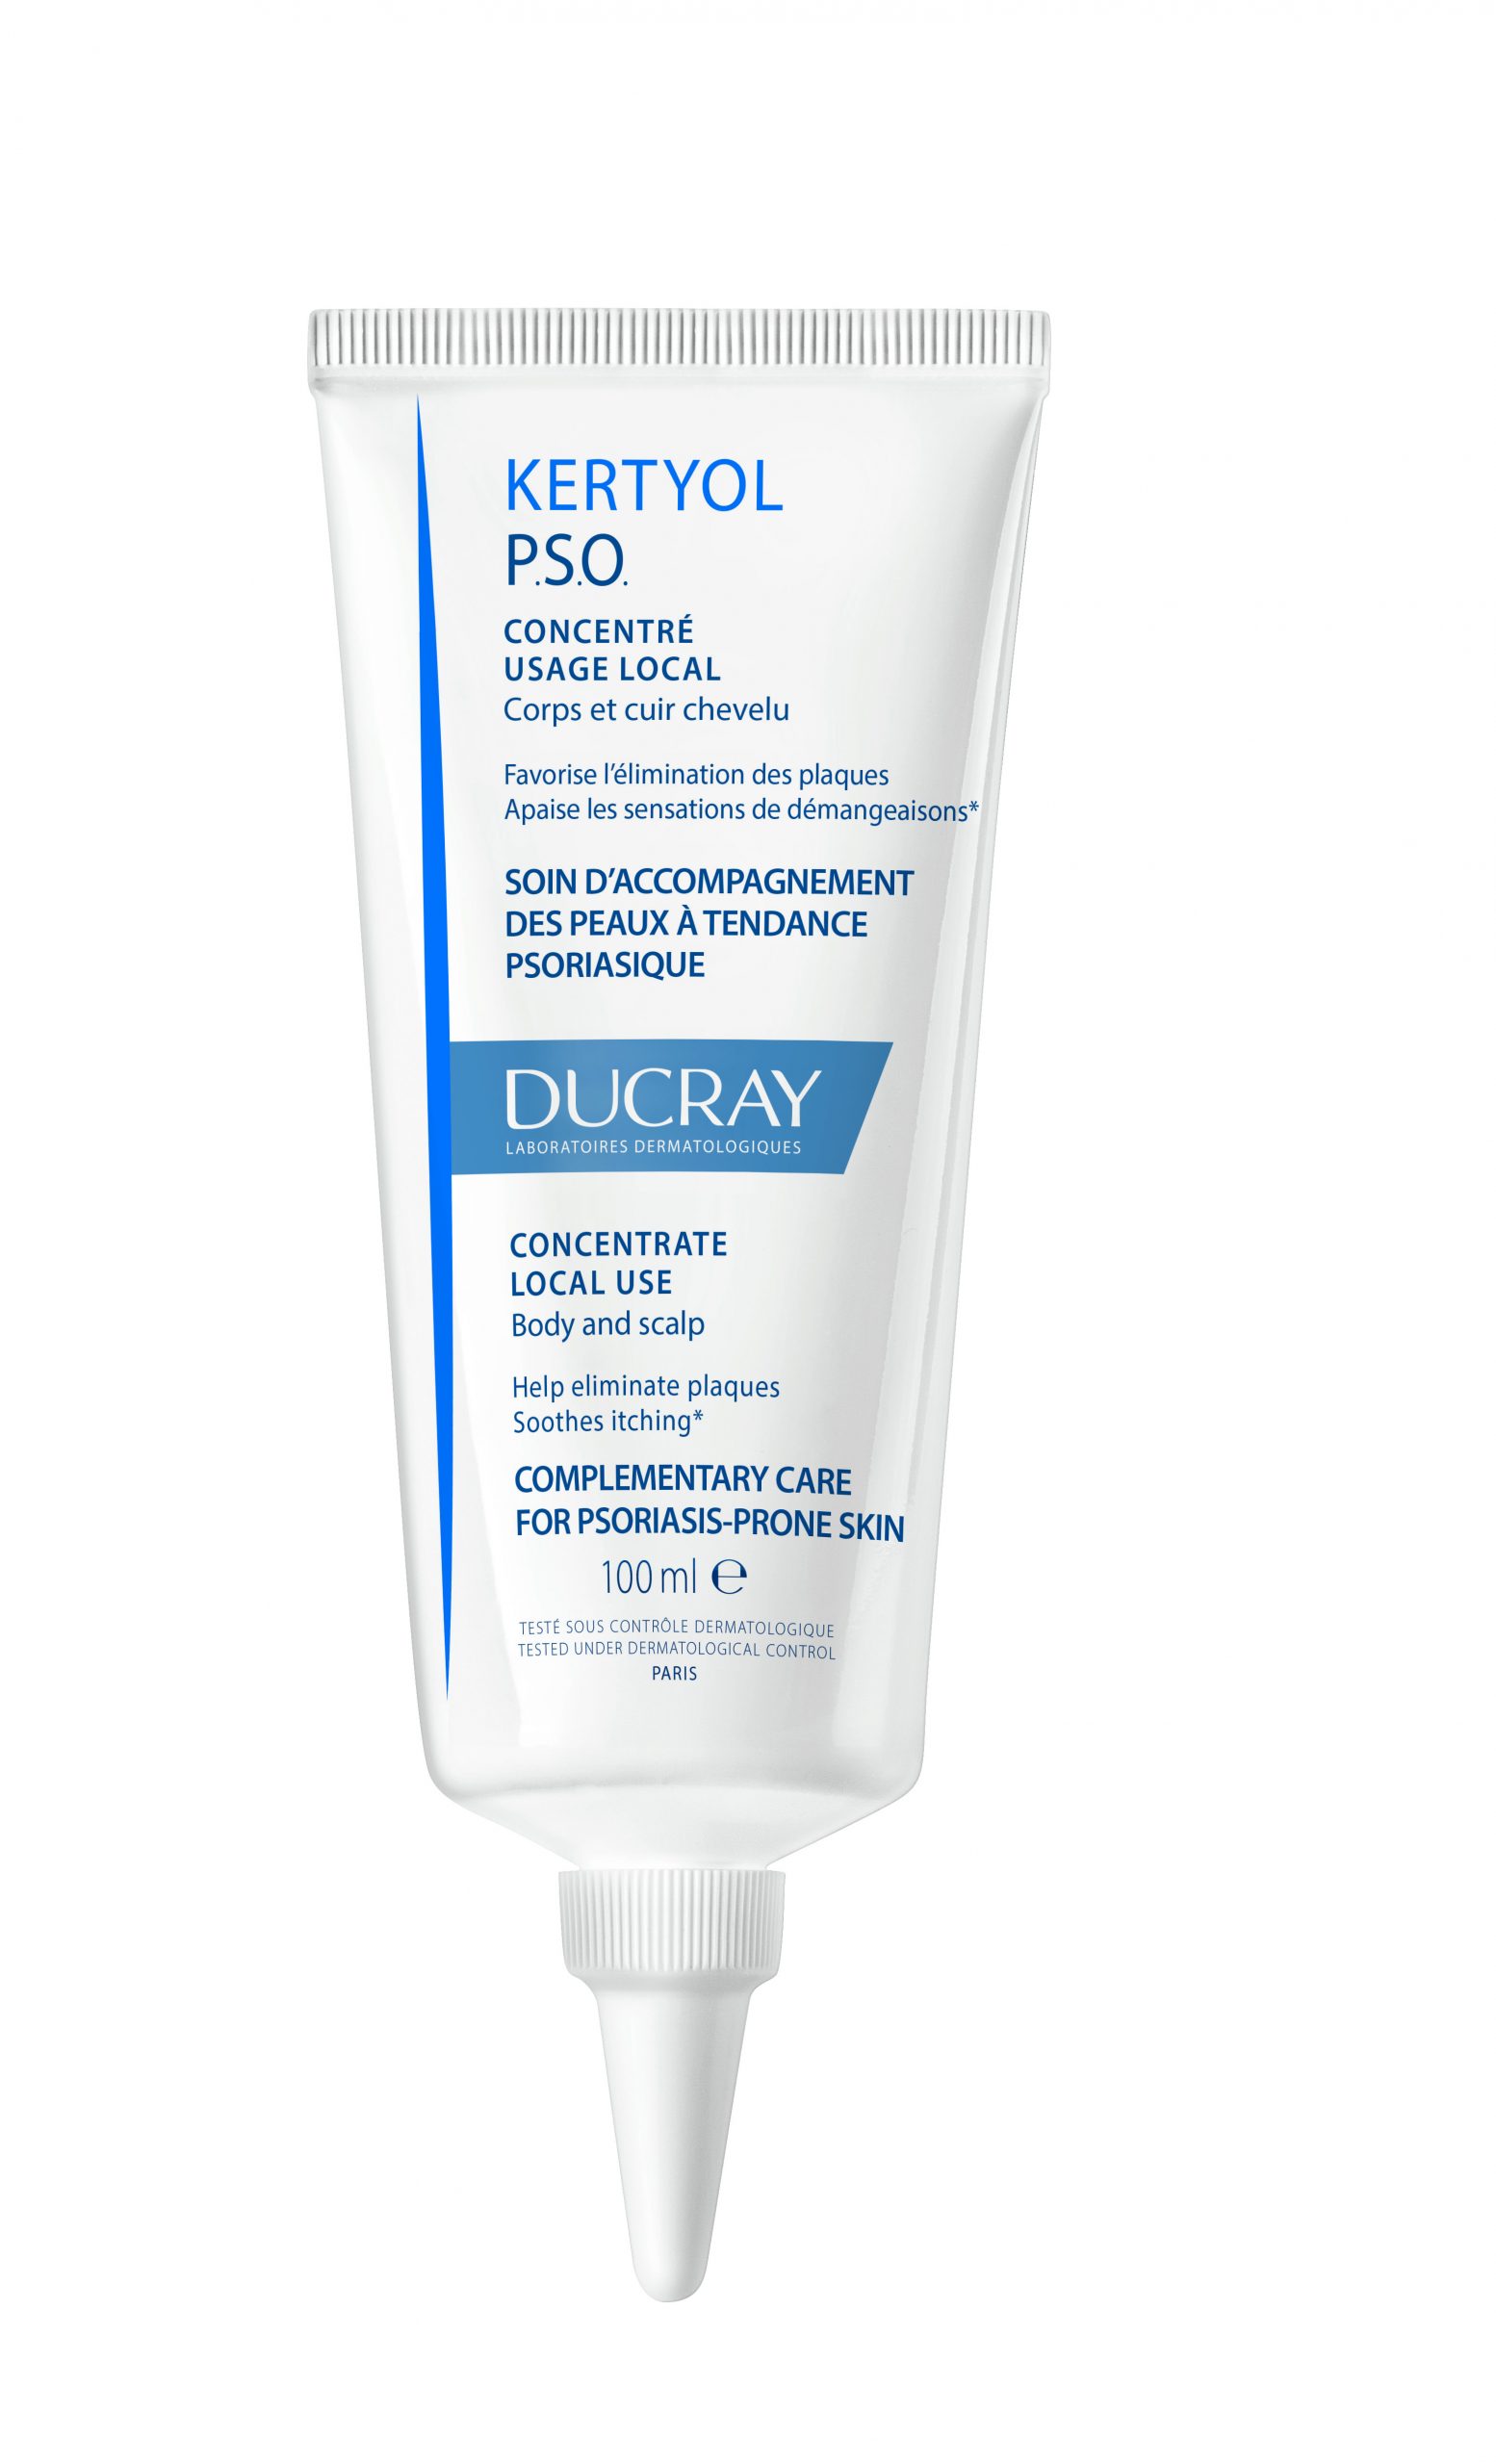 ducray-kertyol-pso-concentrate-local-use-tube-100ml-3282770205879